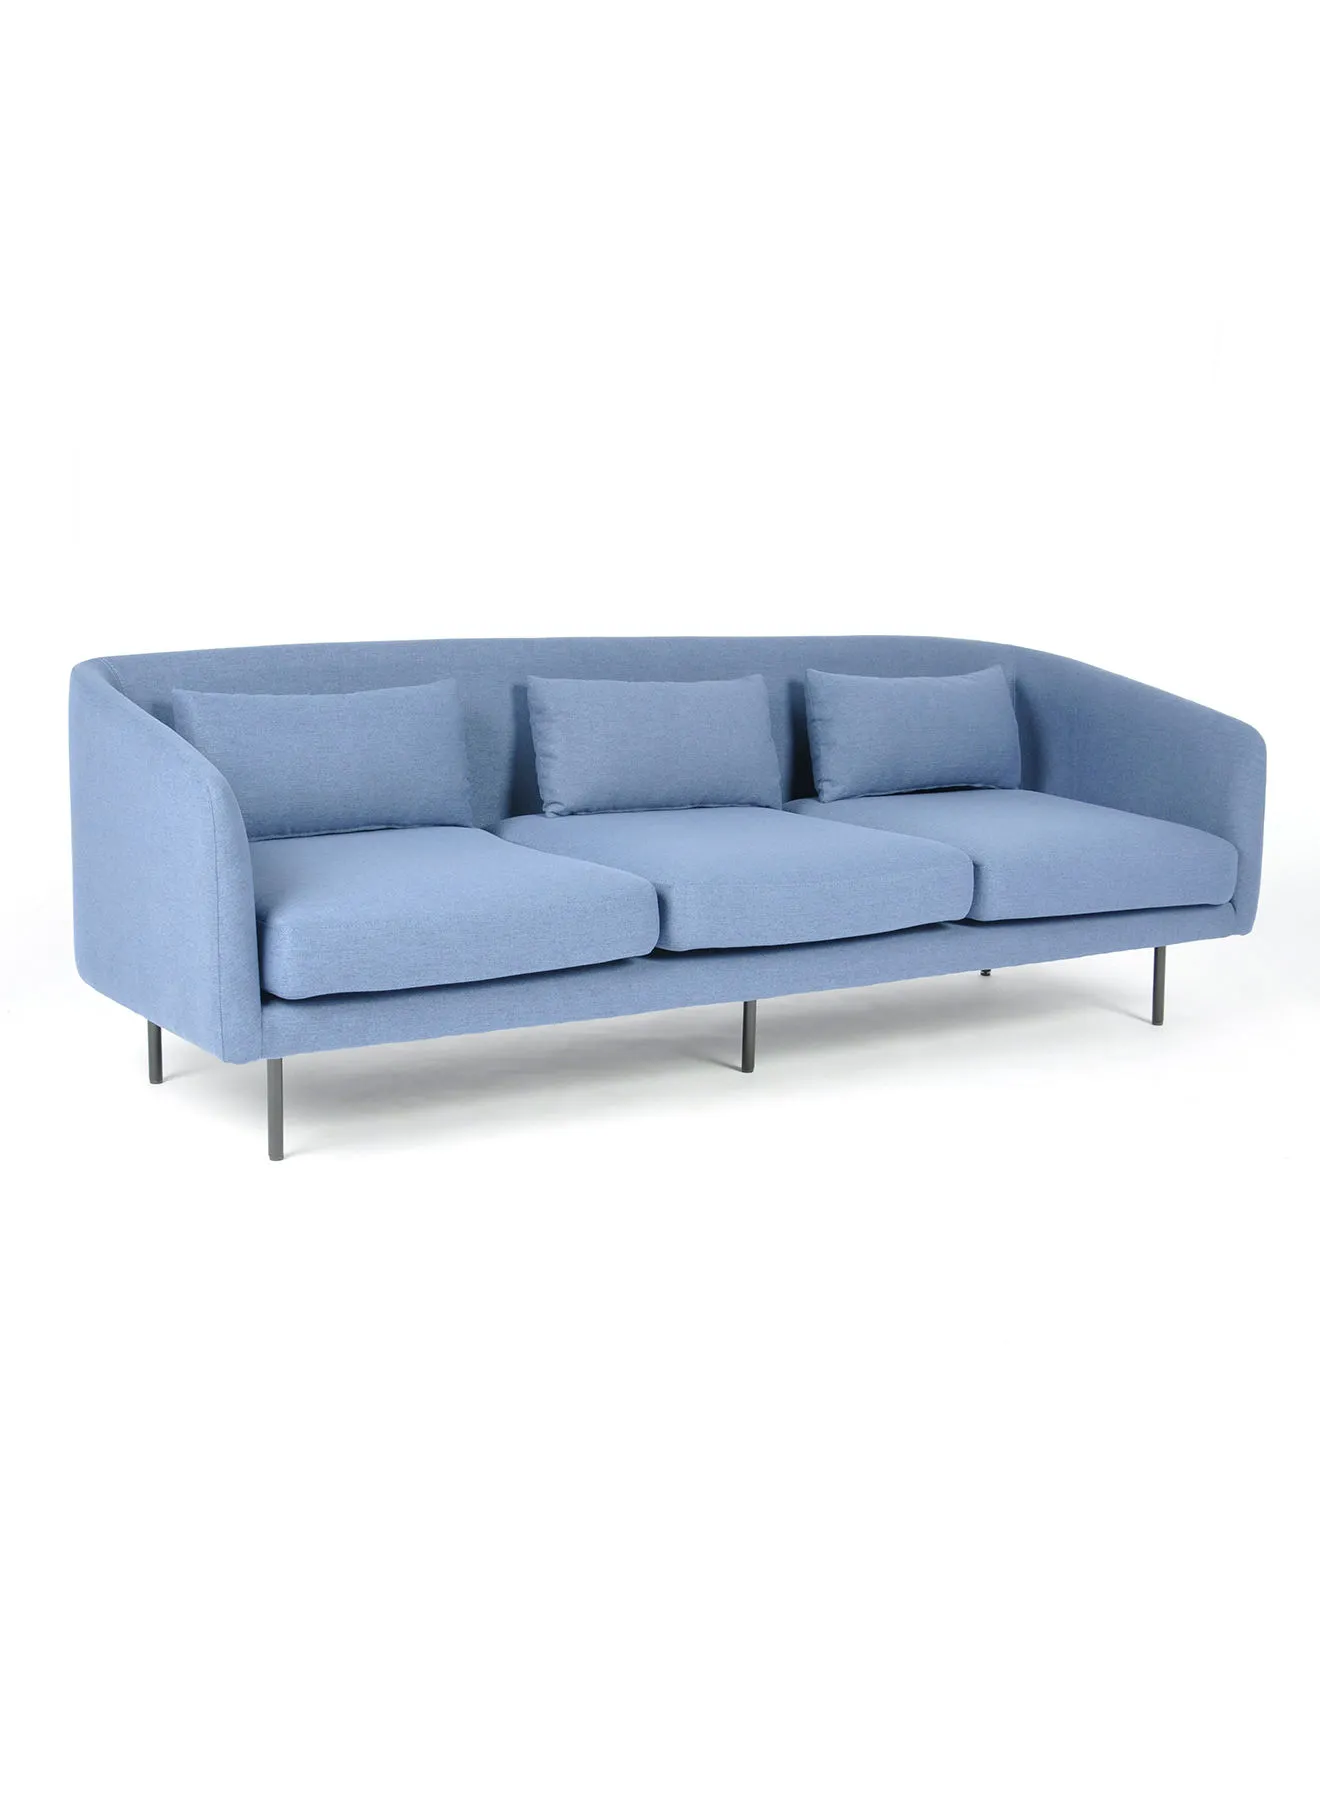 Switch Sofa - Upholstered Fabric Blue Wood Couch - 207 X 70 X 68.5 - 3 Seater Sofa Relaxing Sofa